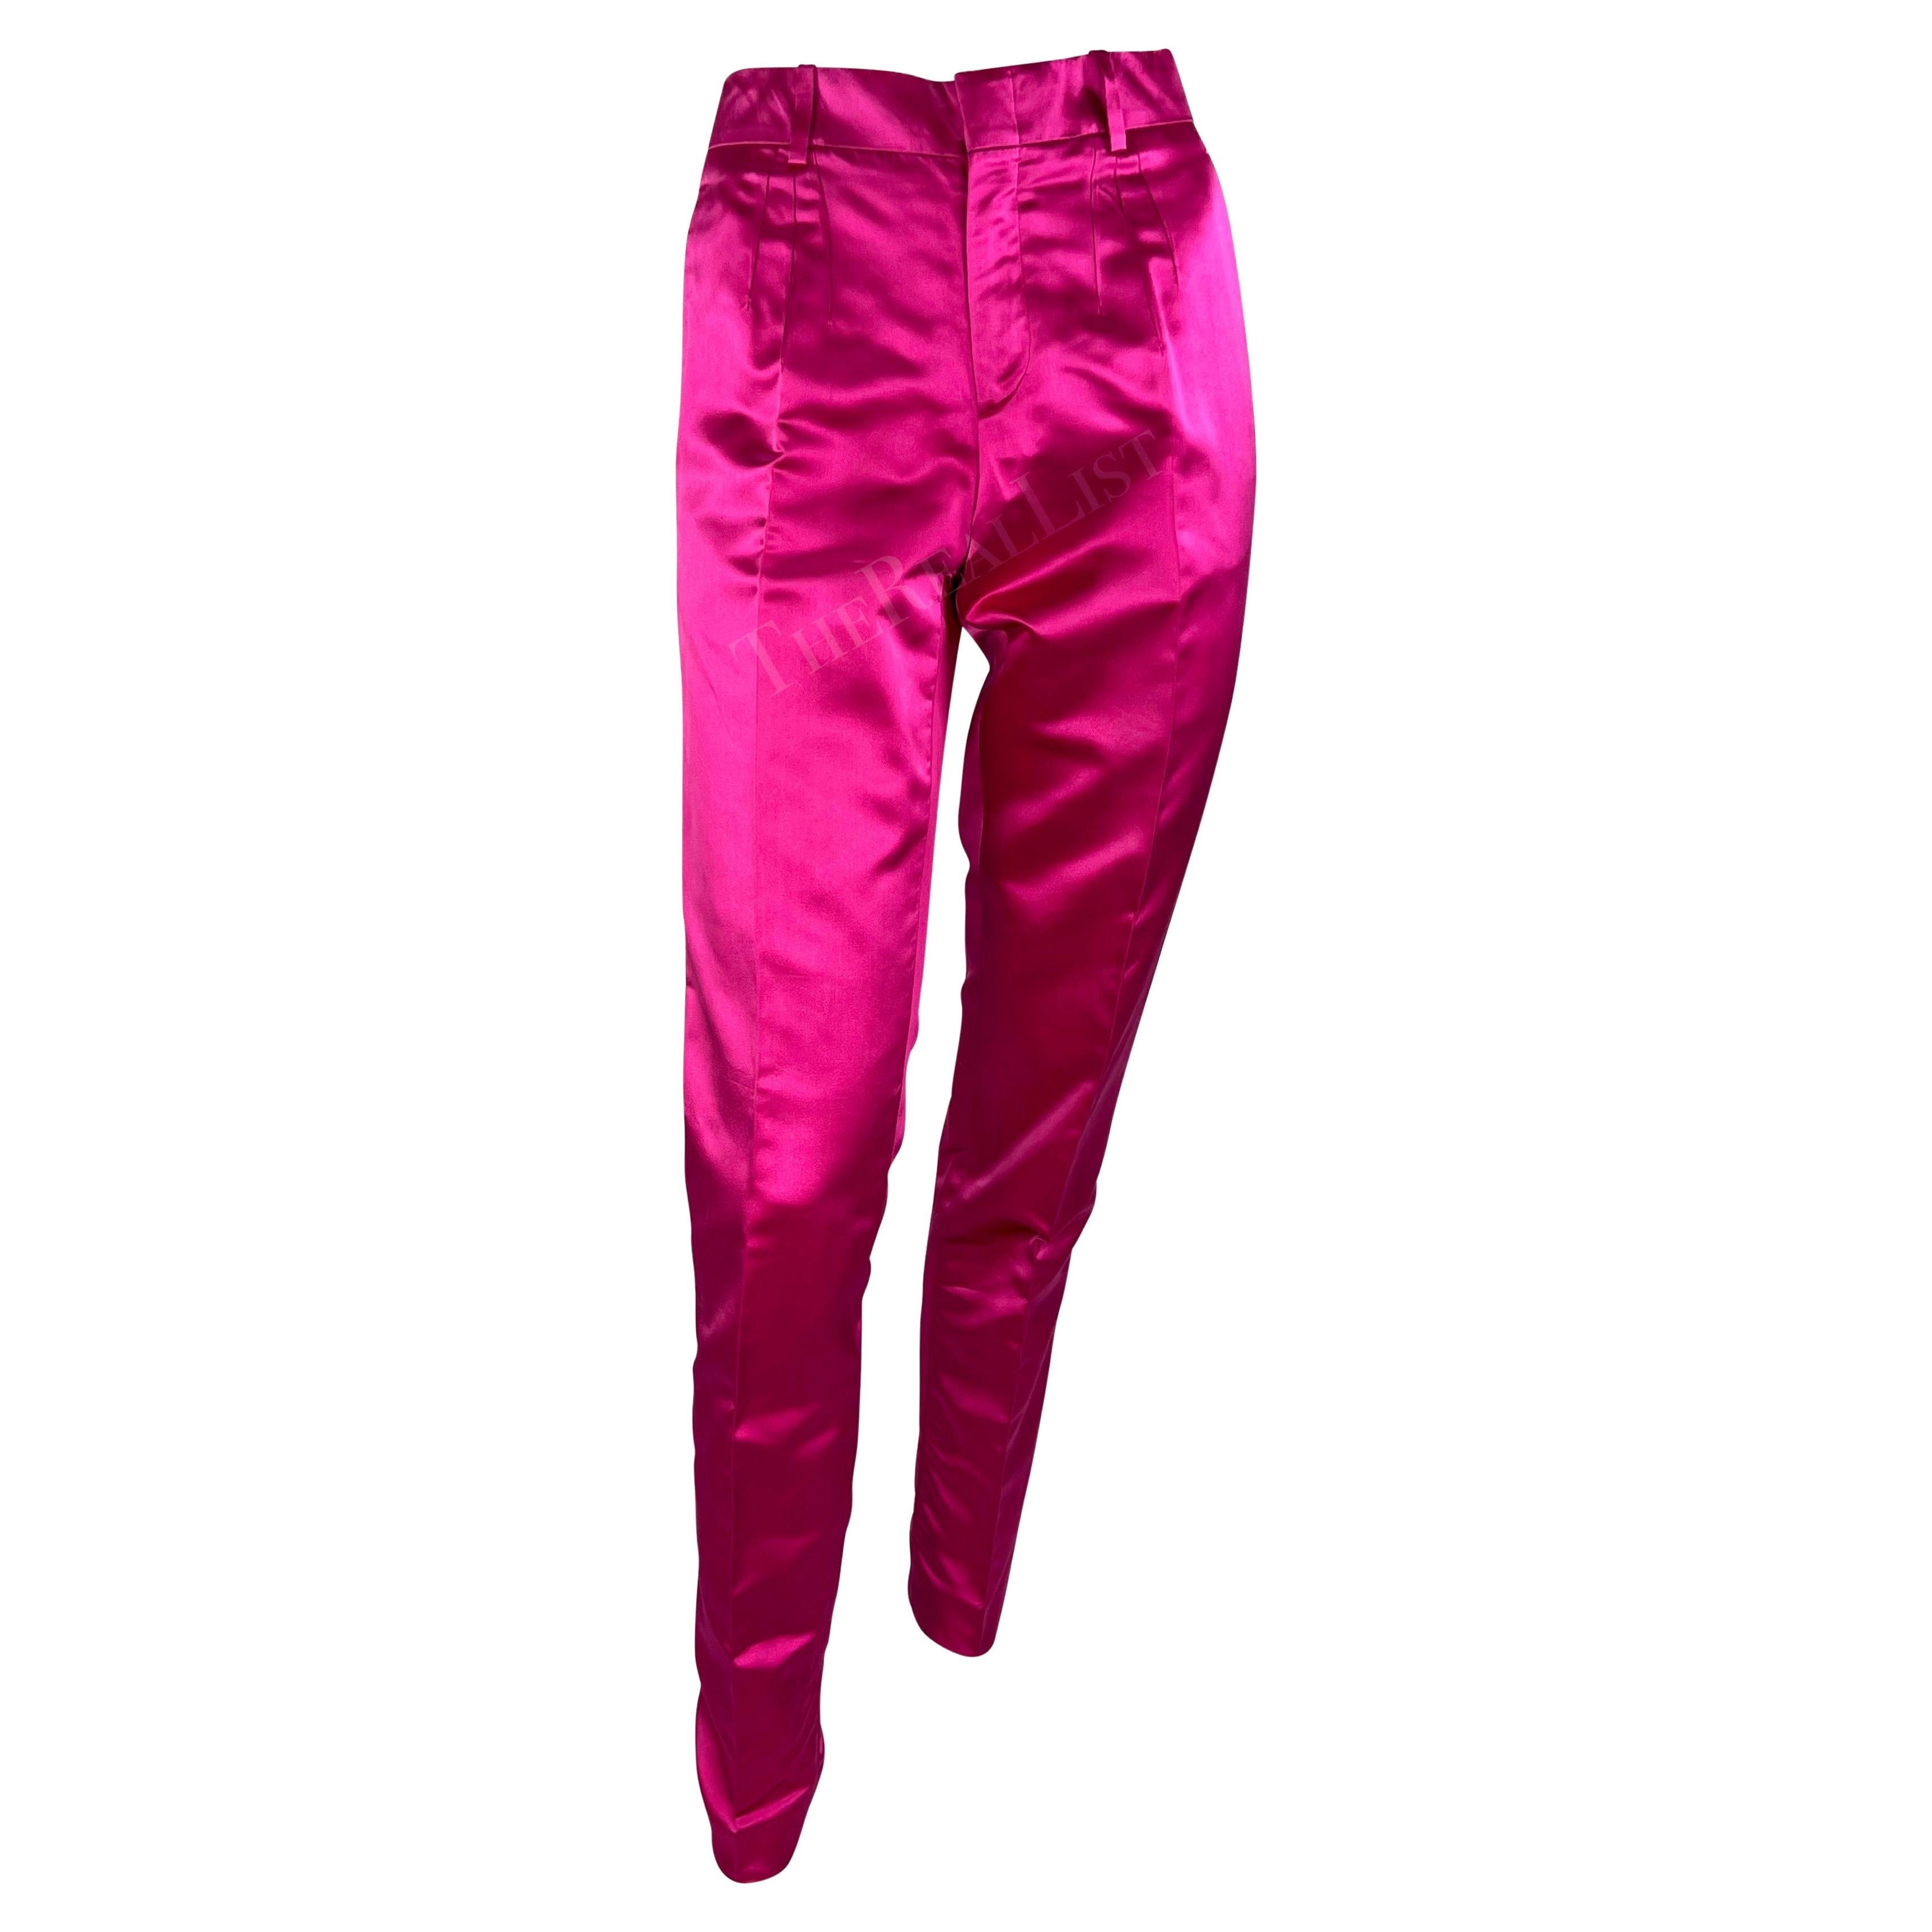 S/S 2001 Gucci by Tom Ford Runway Hot Pink Satin Silk Blend Tapered Pants For Sale